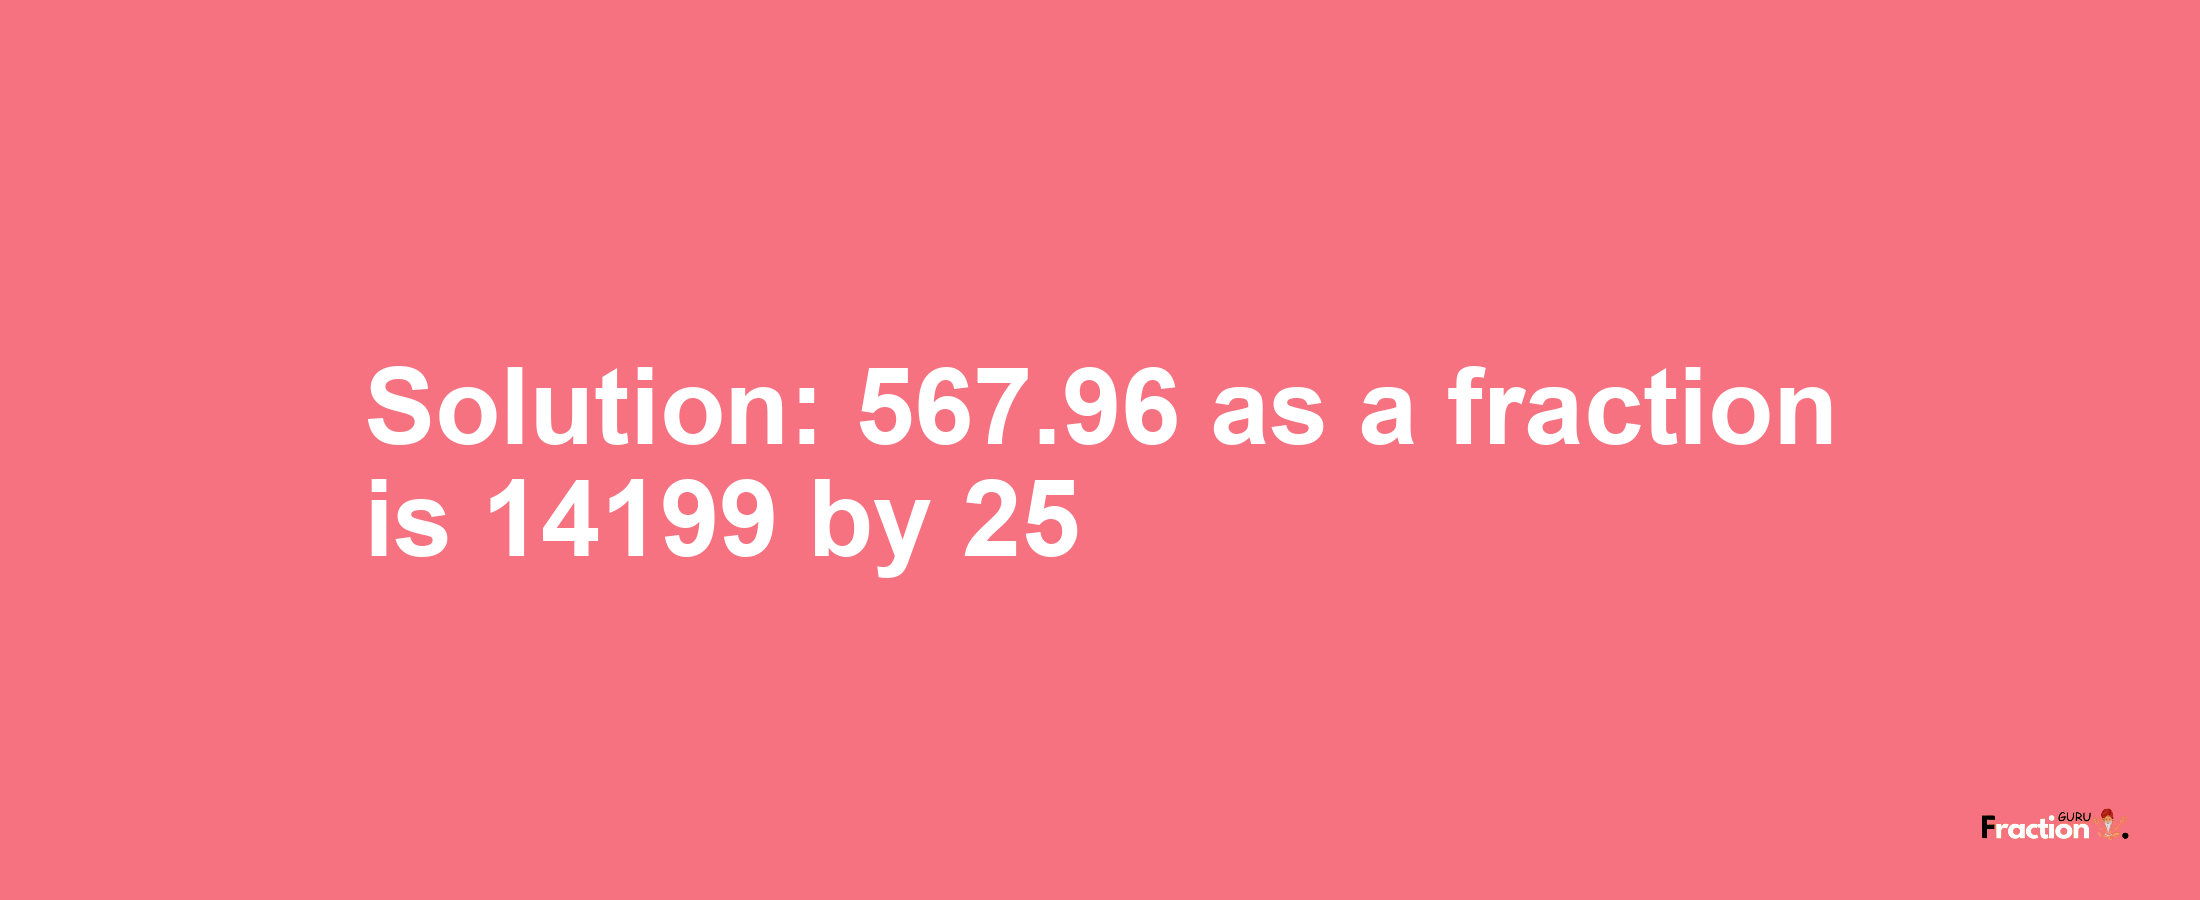 Solution:567.96 as a fraction is 14199/25